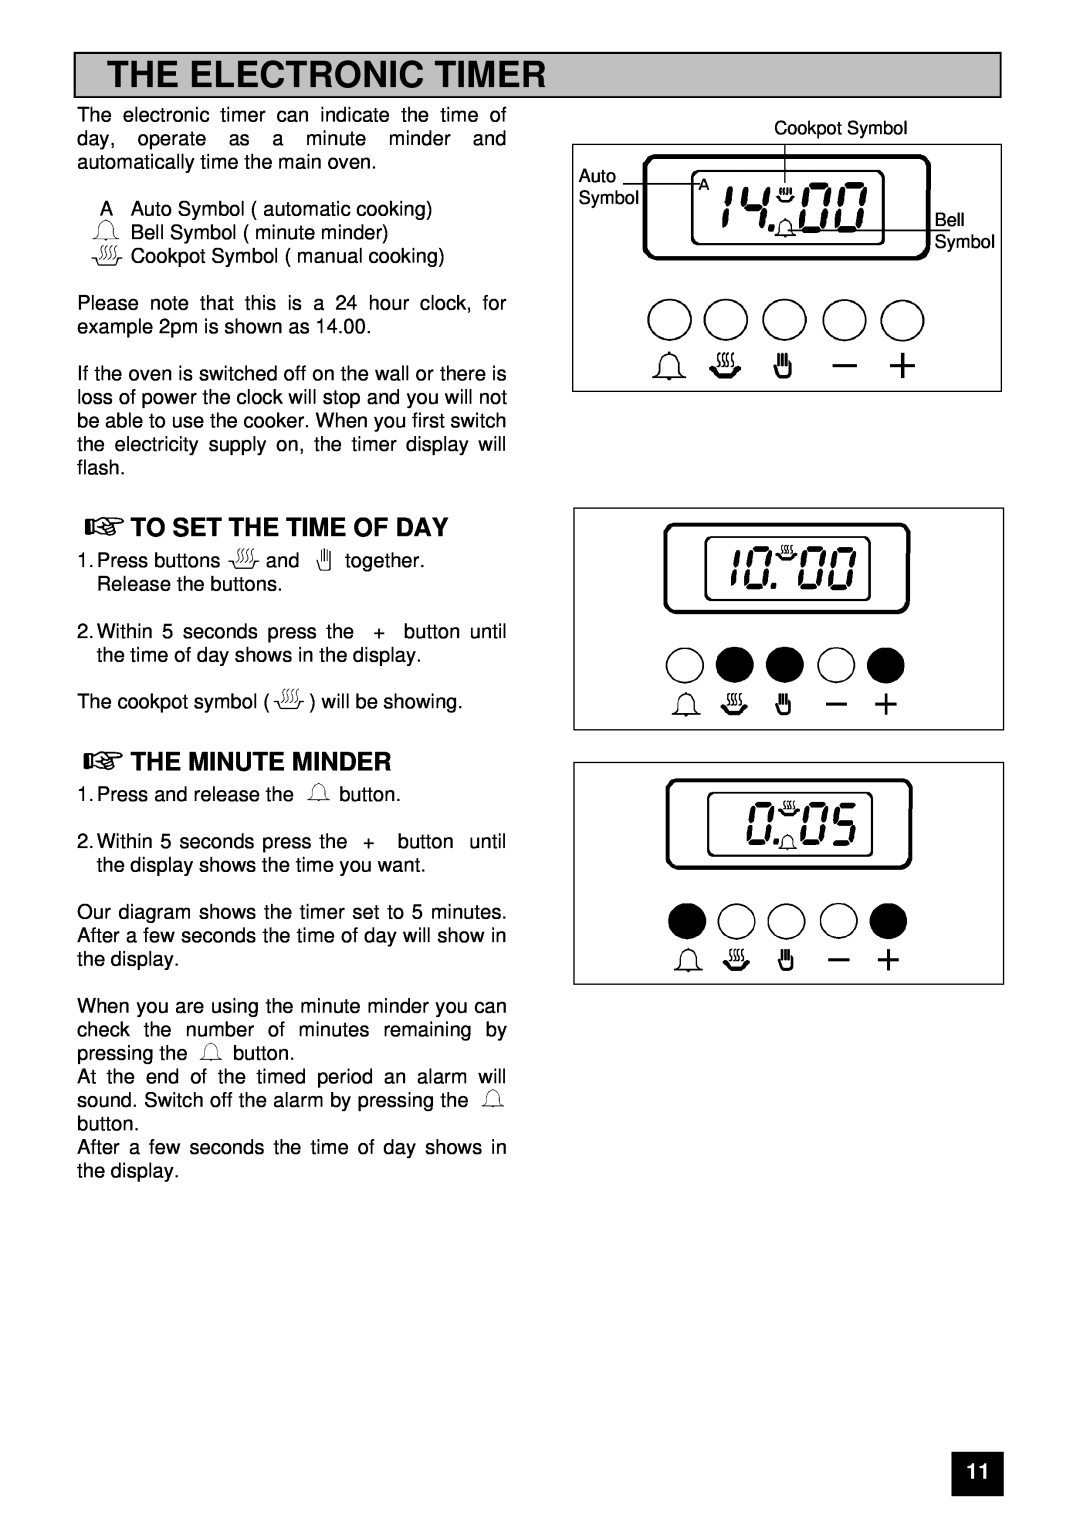 Zanussi ZUG 78 manual The Electronic Timer, To Set The Time Of Day, The Minute Minder 